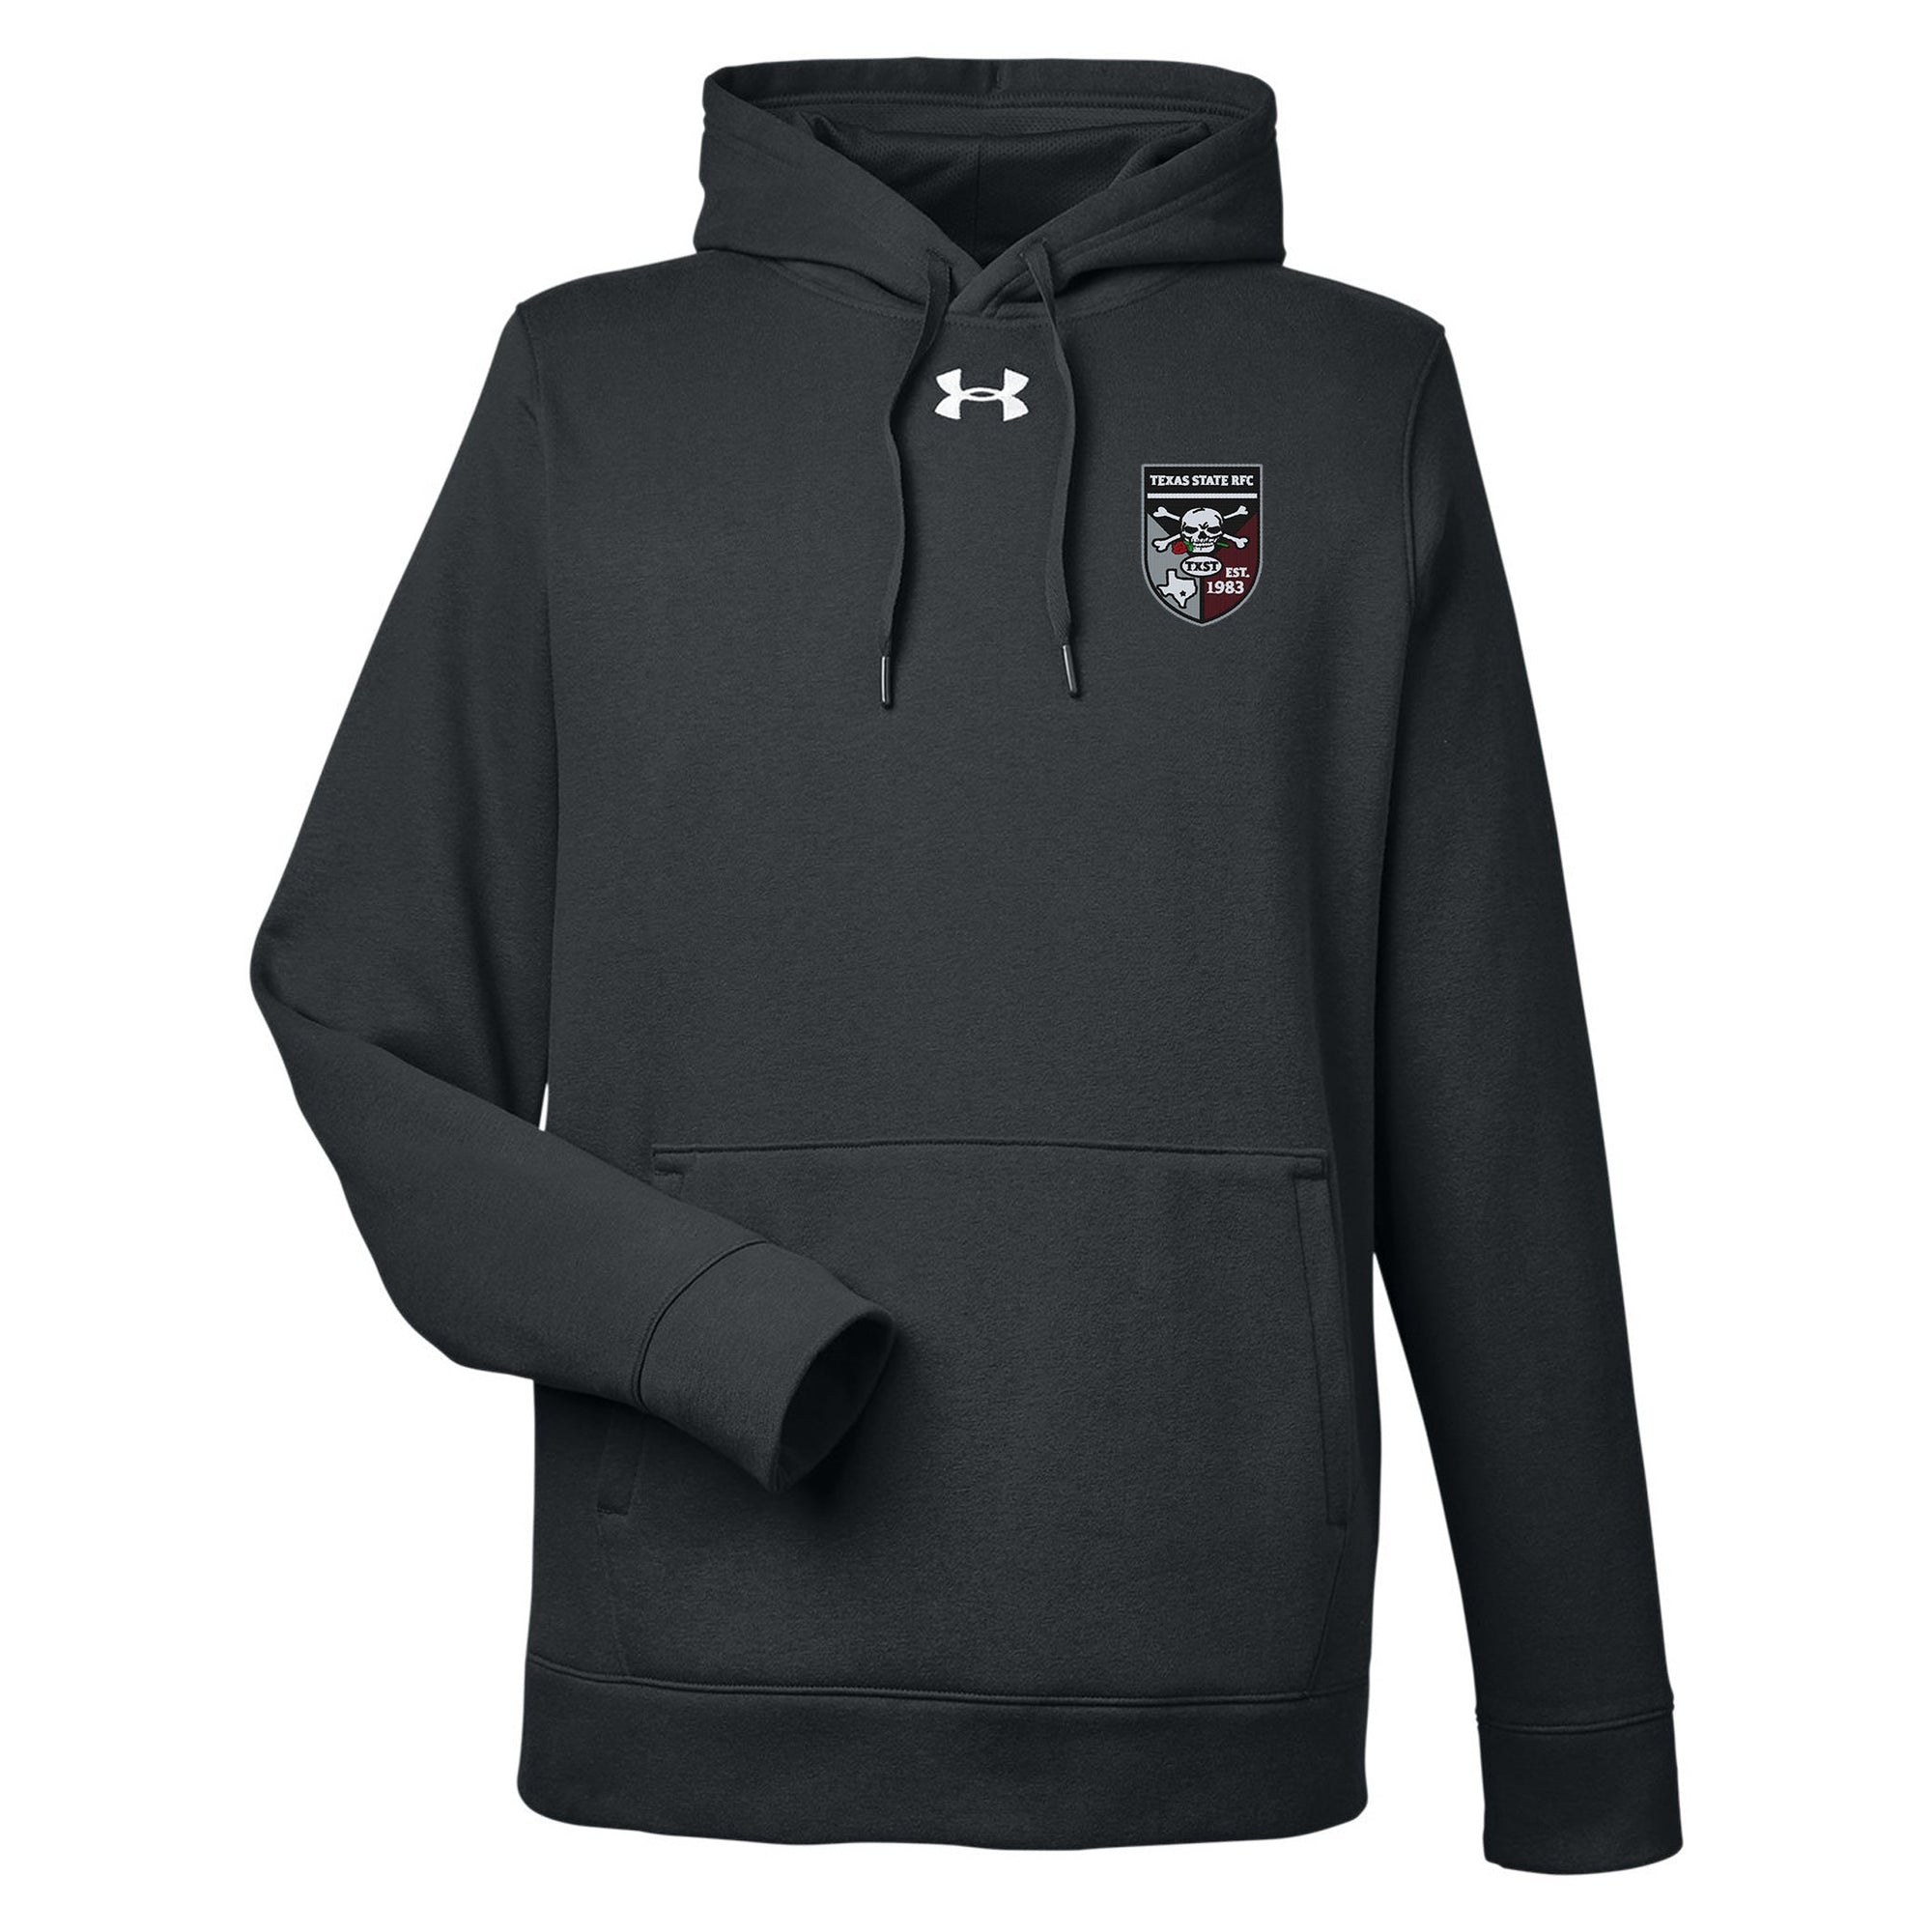 Rugby Imports Texas State Rugby Hustle Hoodie